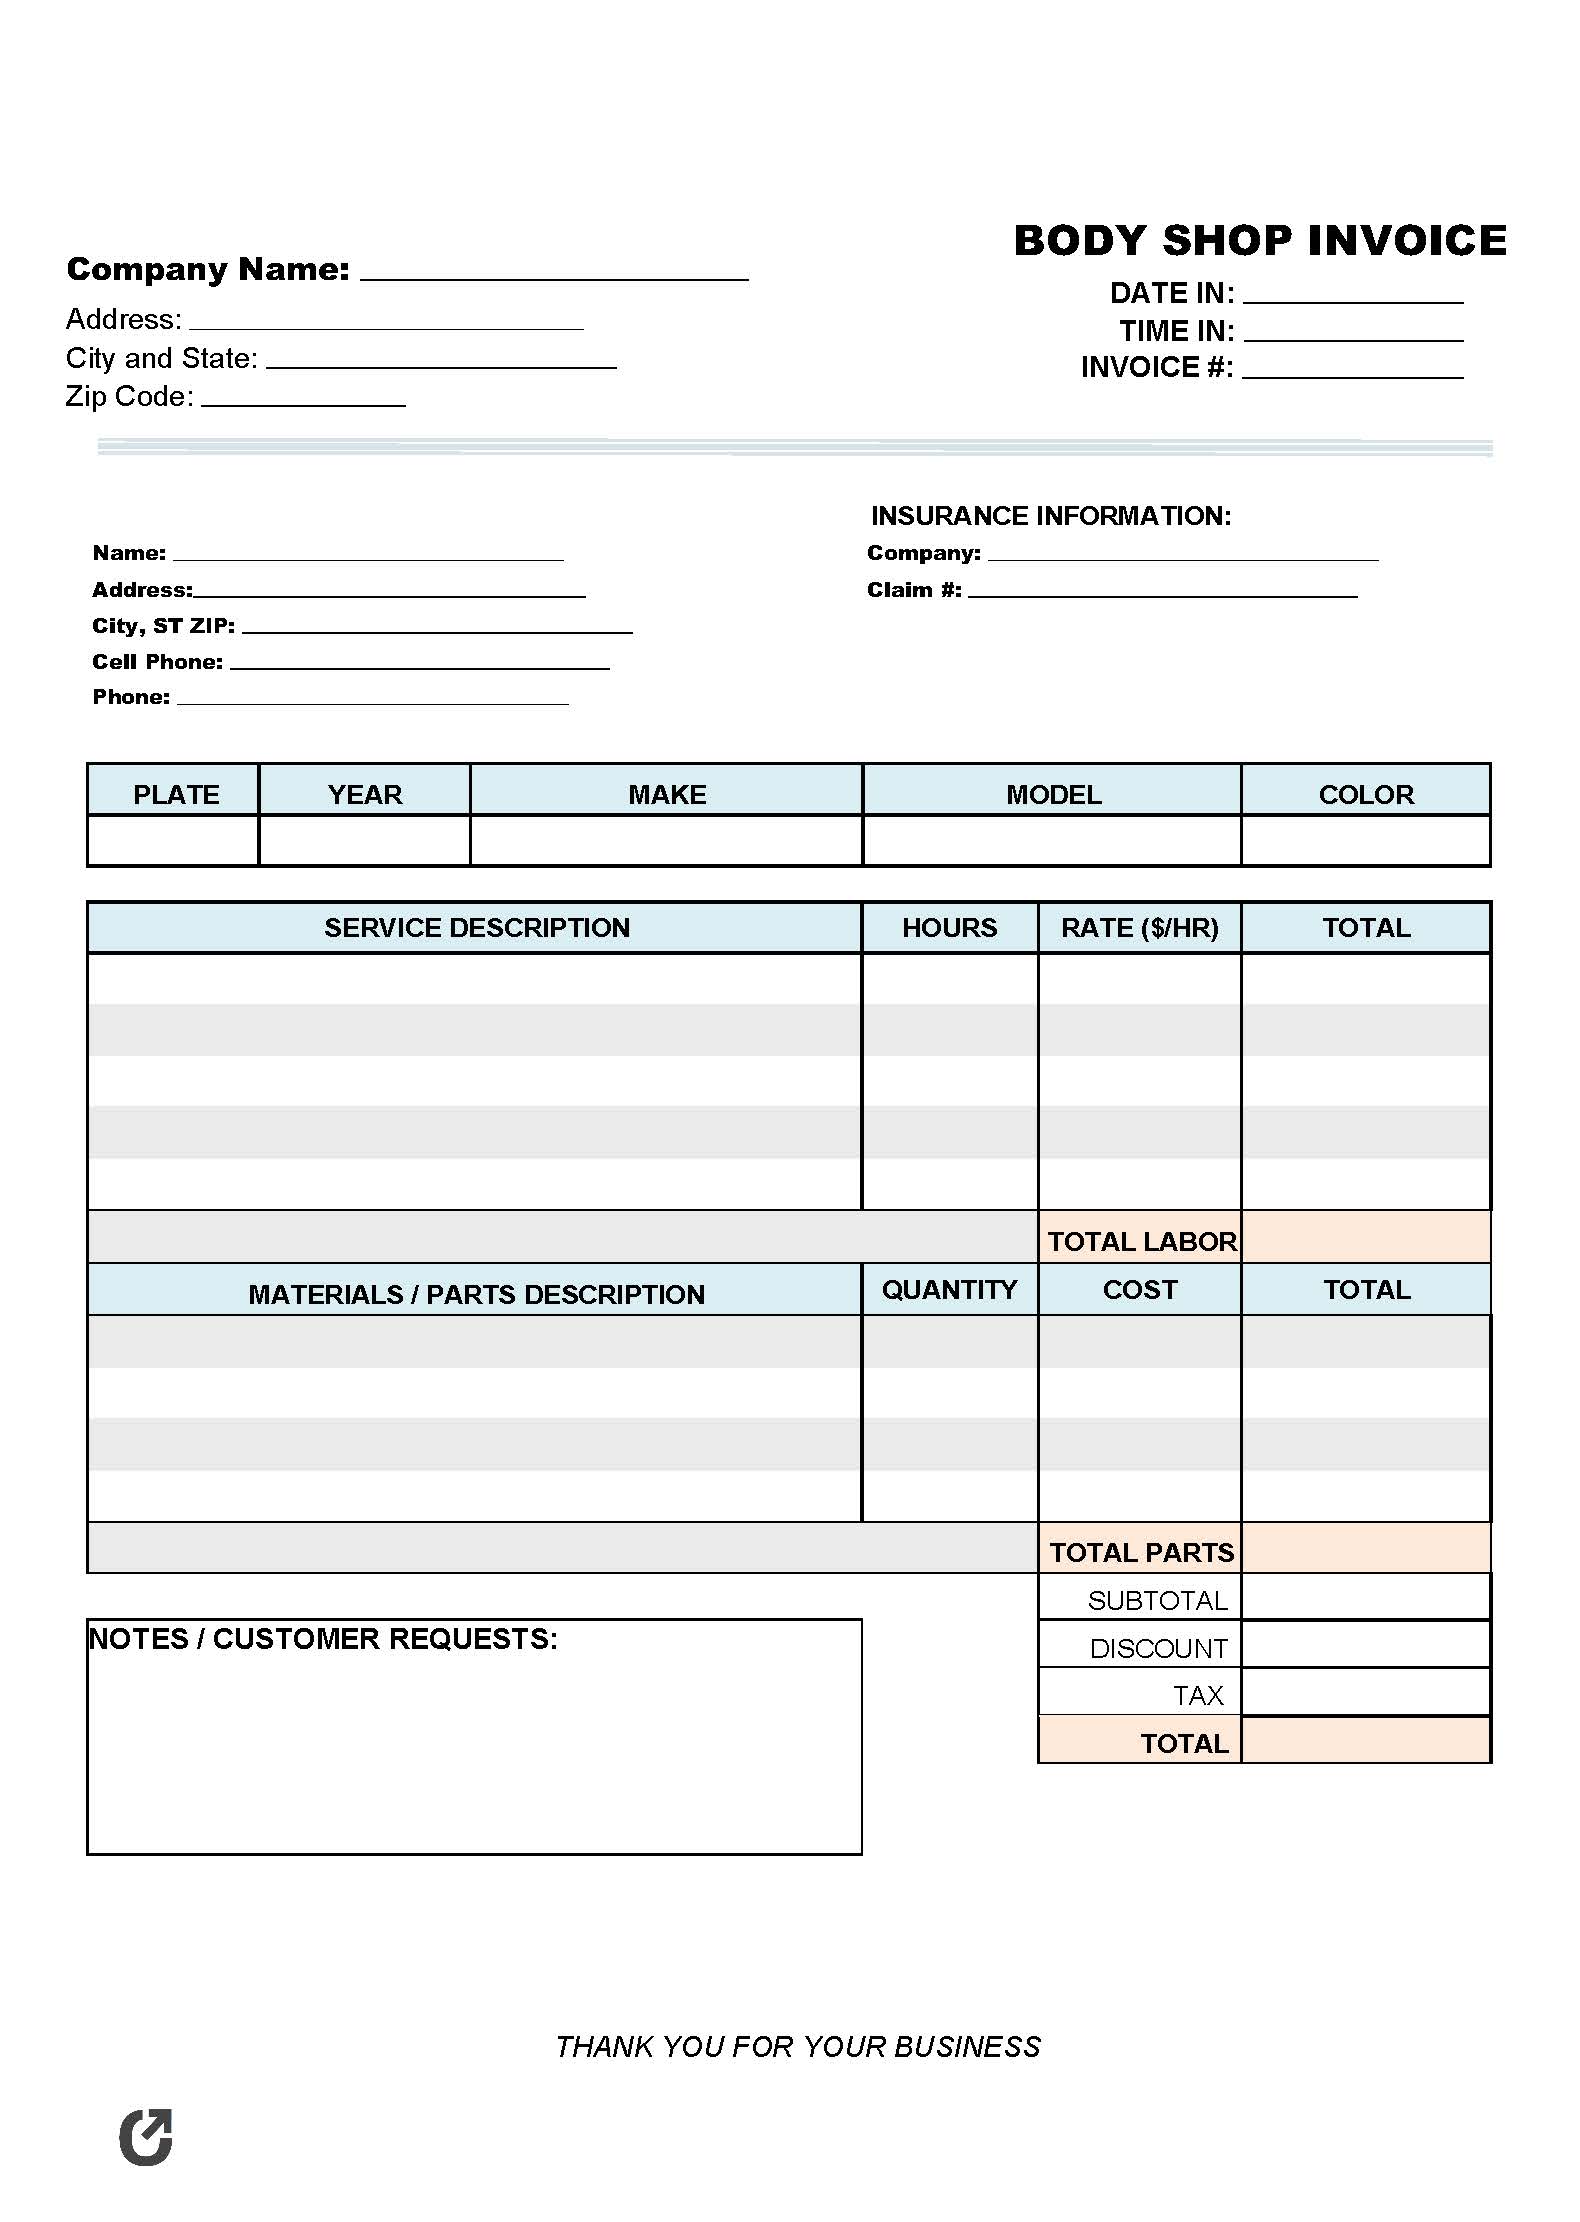 Free Body Shop Invoice Template  PDF  WORD  EXCEL In Mechanics Invoice Template